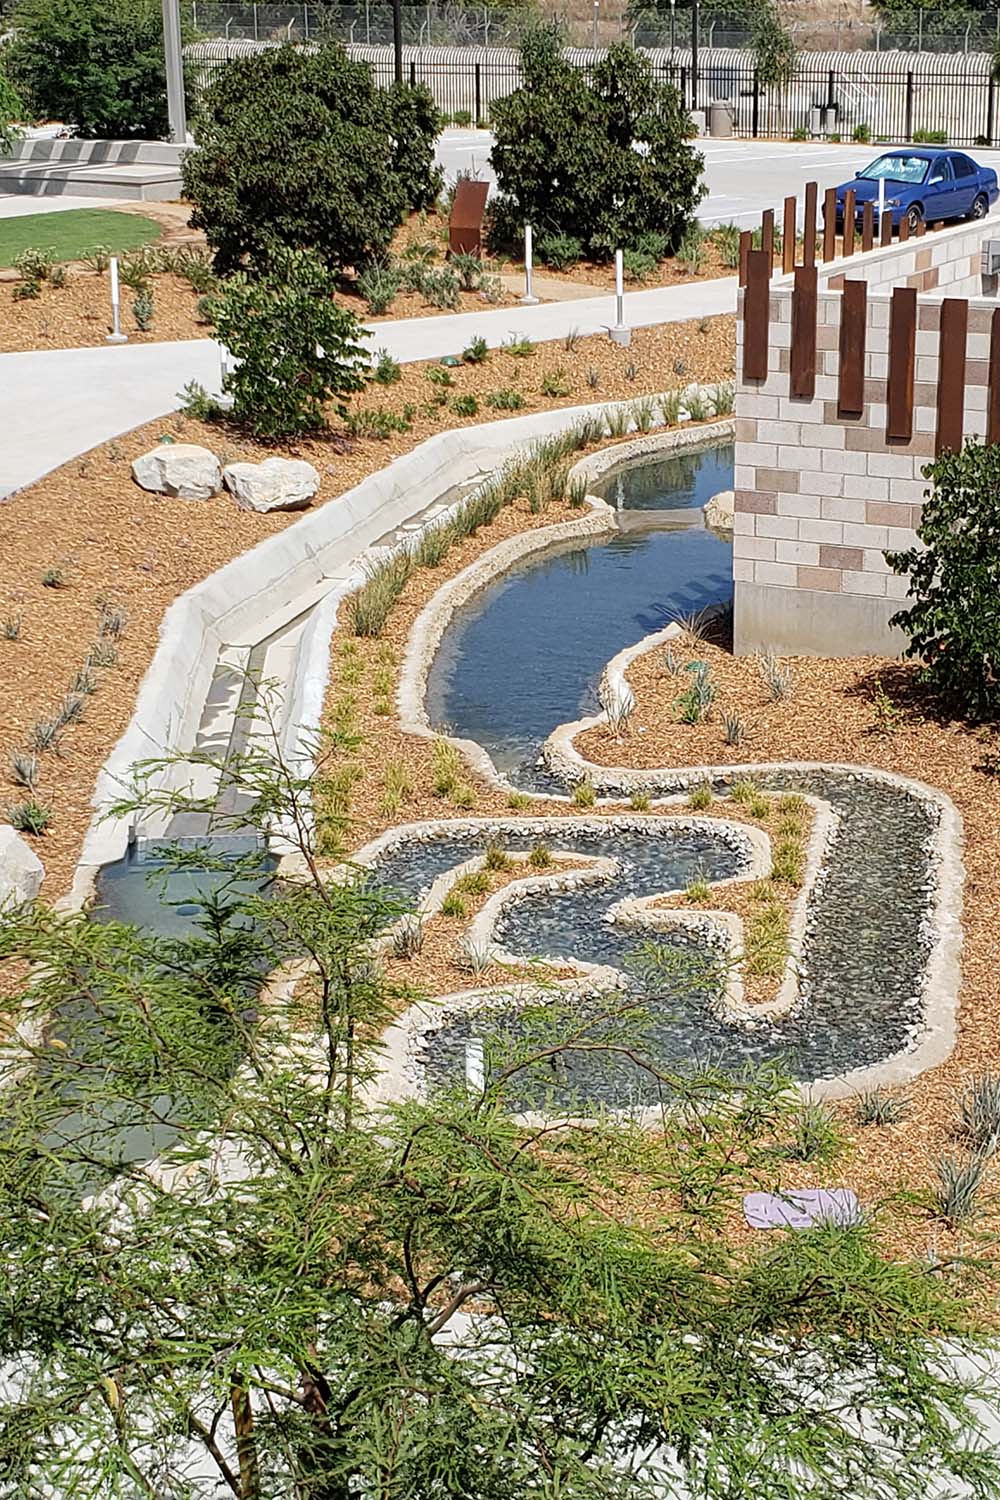 Albert Robles Center for Water Recycling and Environmental Learning (ARC)